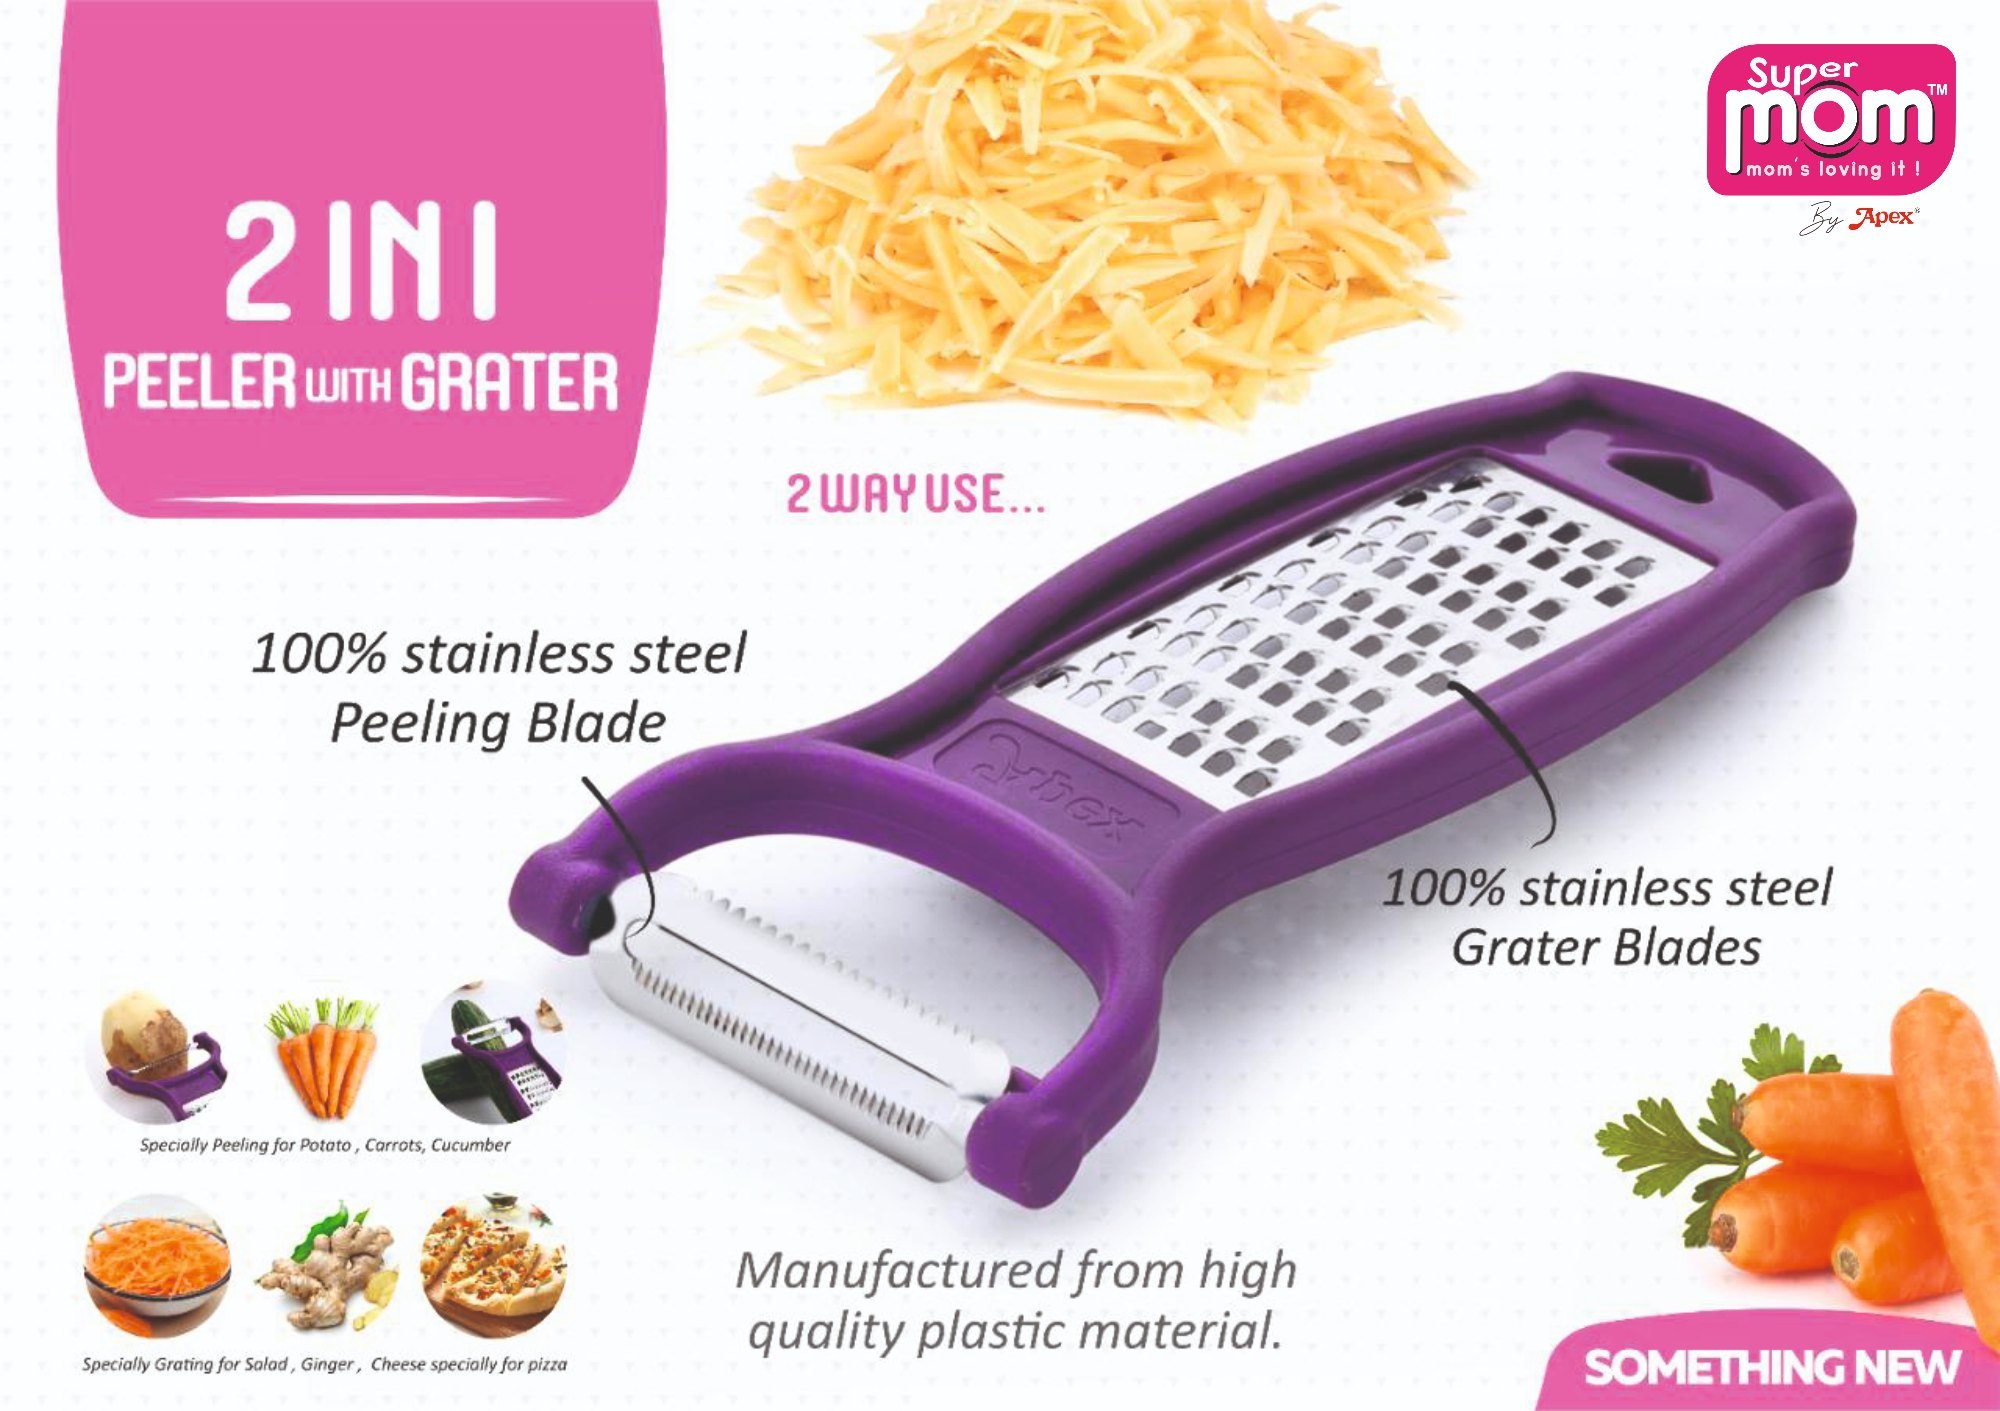 PEELER WITH GRATER 2IN1  SUPER MOM